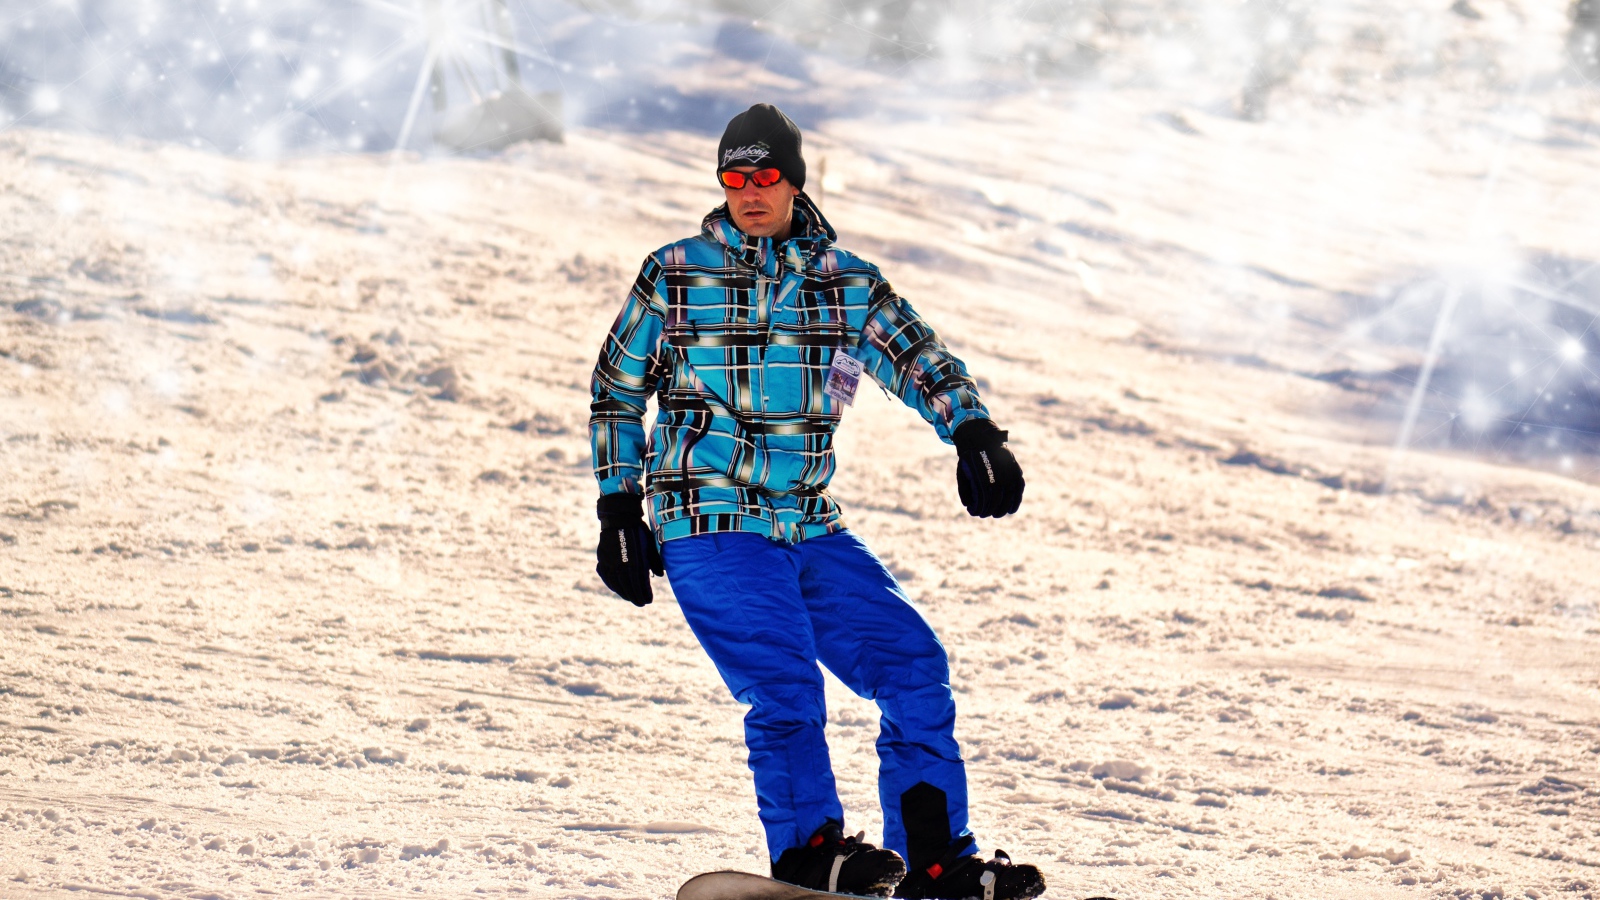 A man snowboarder drives down the mountain